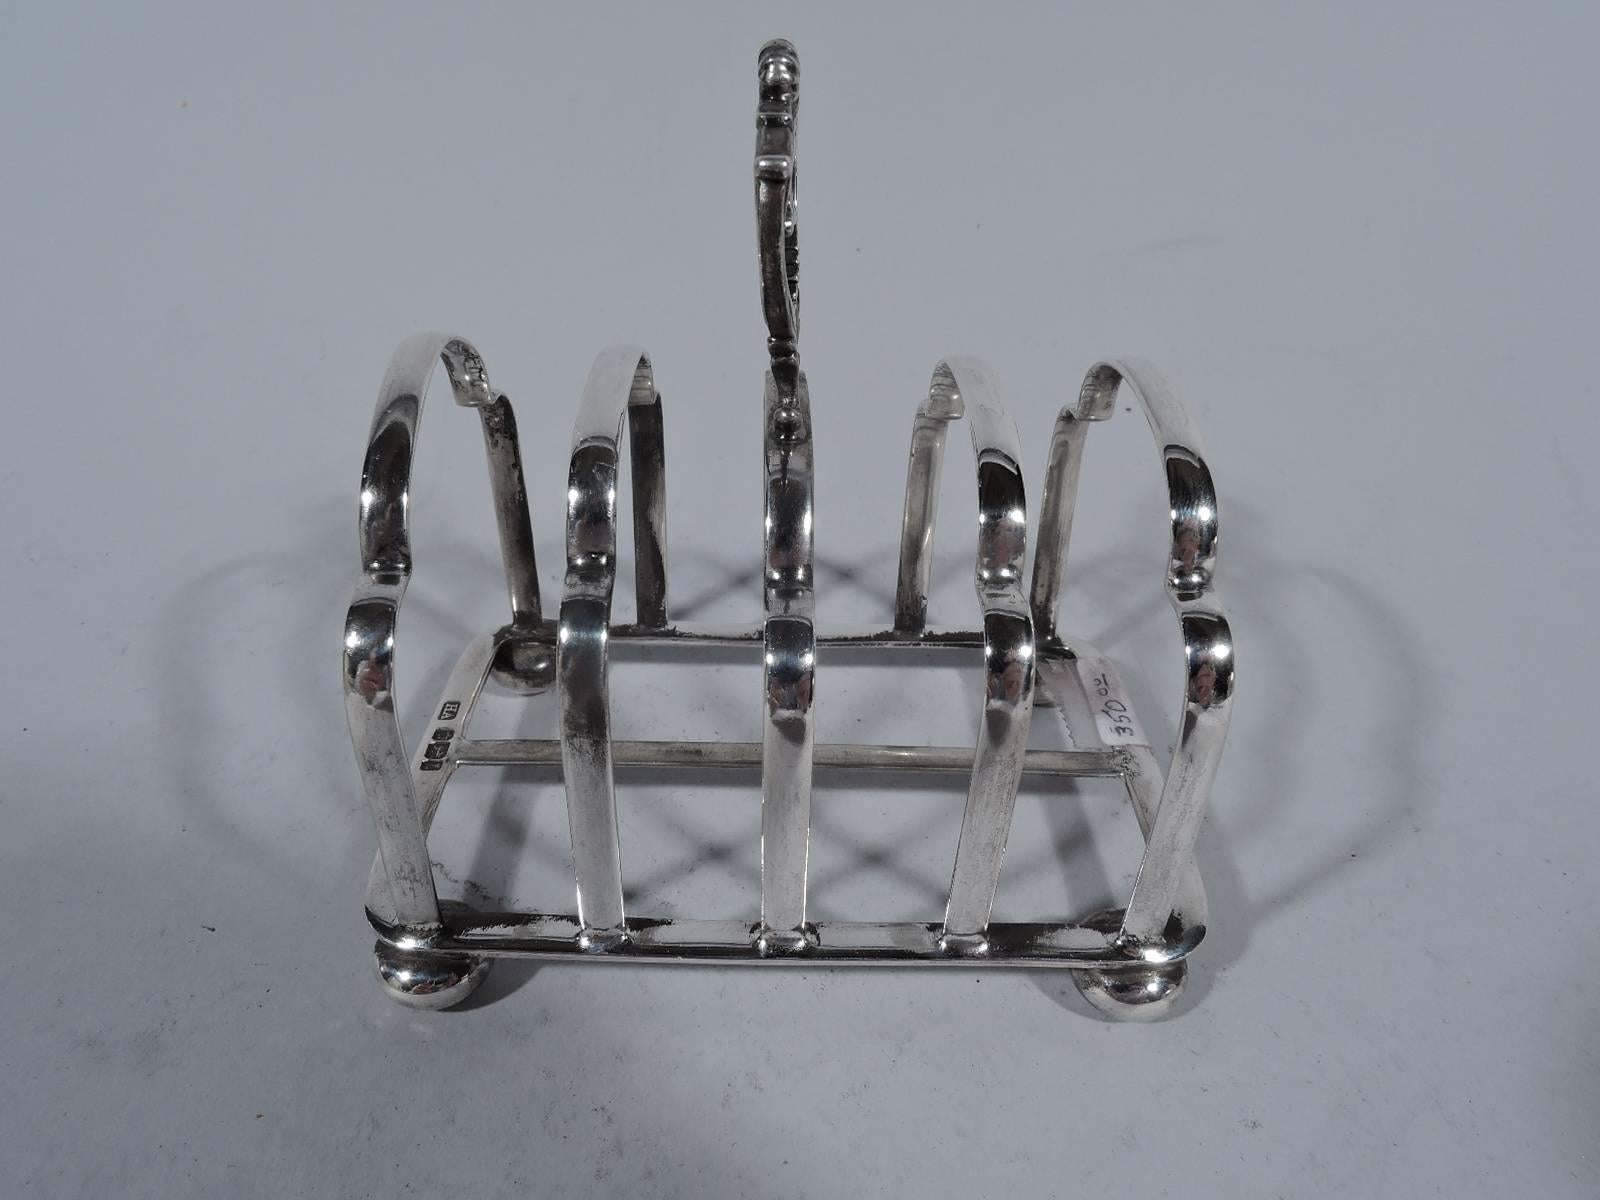 Edwardian sterling silver toast rack. Made by Atkin Brothers in Sheffield in 1903. Five trefoil arches mounted to rectangular frame with stretcher on 4 bun supports. Handle comprises 2 joined scrolls. A practical addition to the breakfast tray.